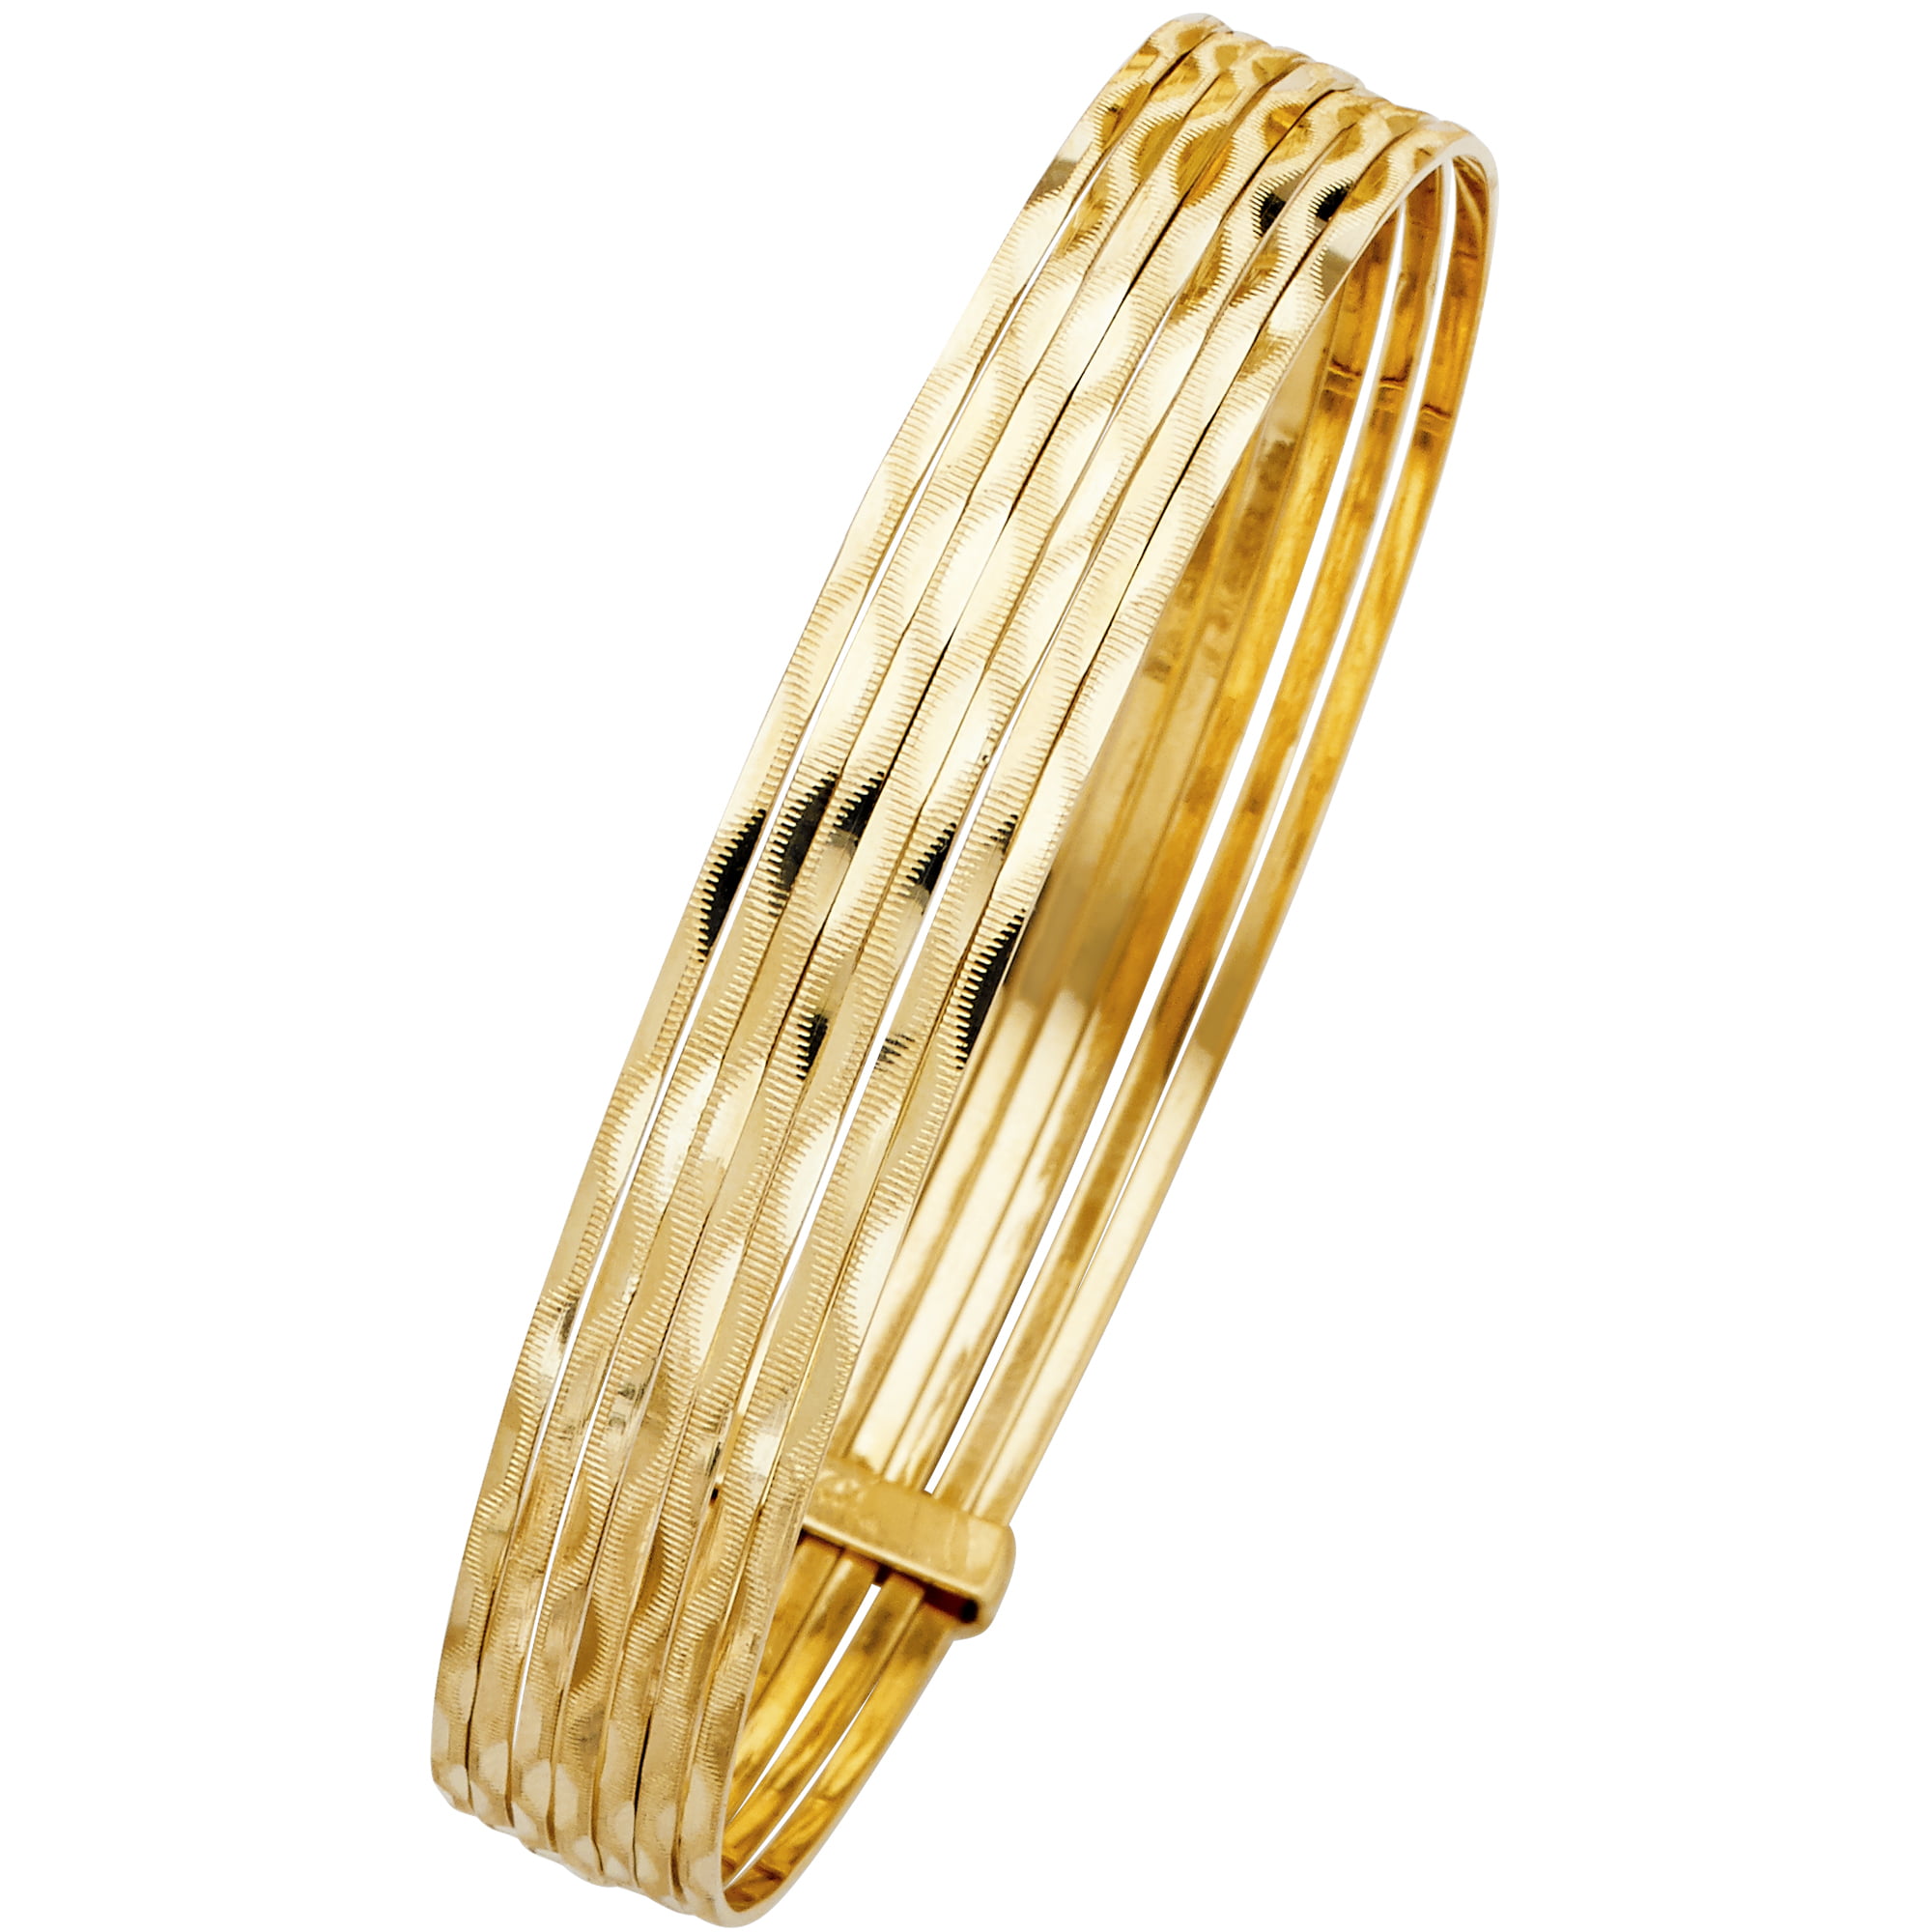 Gift 14k Yellow Gold Dazzling Detail Bangle Glam Style 7.8 inches Hollow